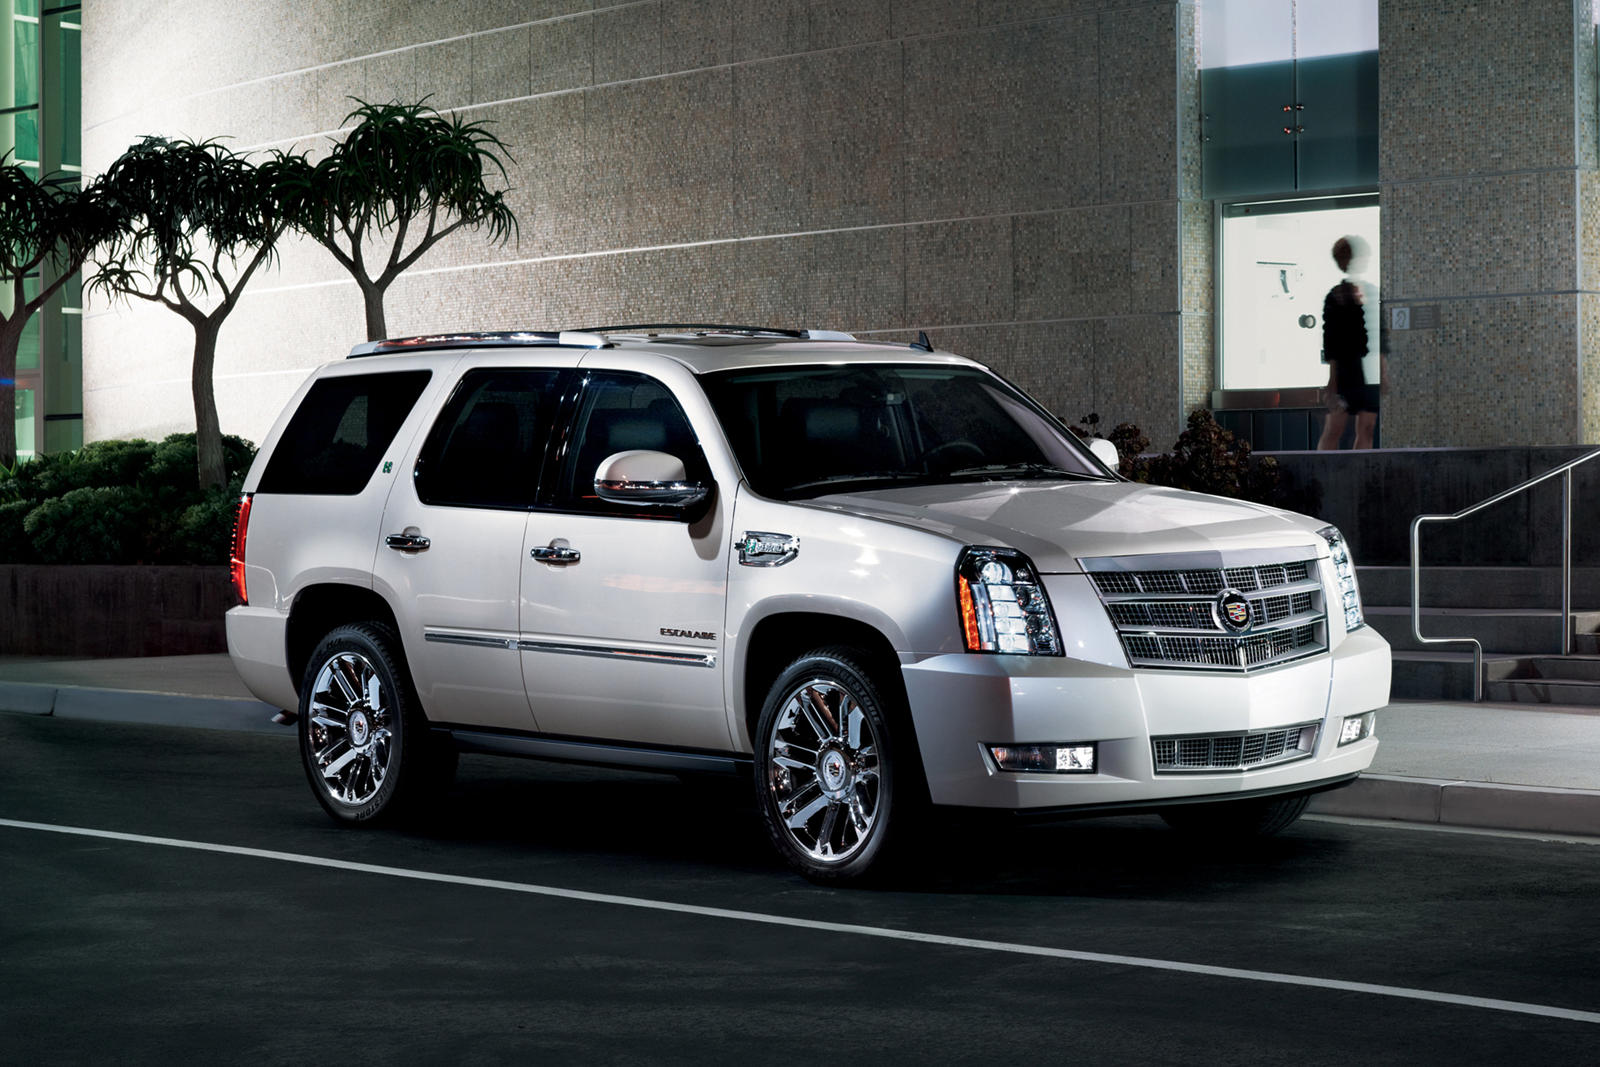 Used Cadillac Escalade Hybrid 4X4 for sale: buy 4 Wheel Drive SUV with